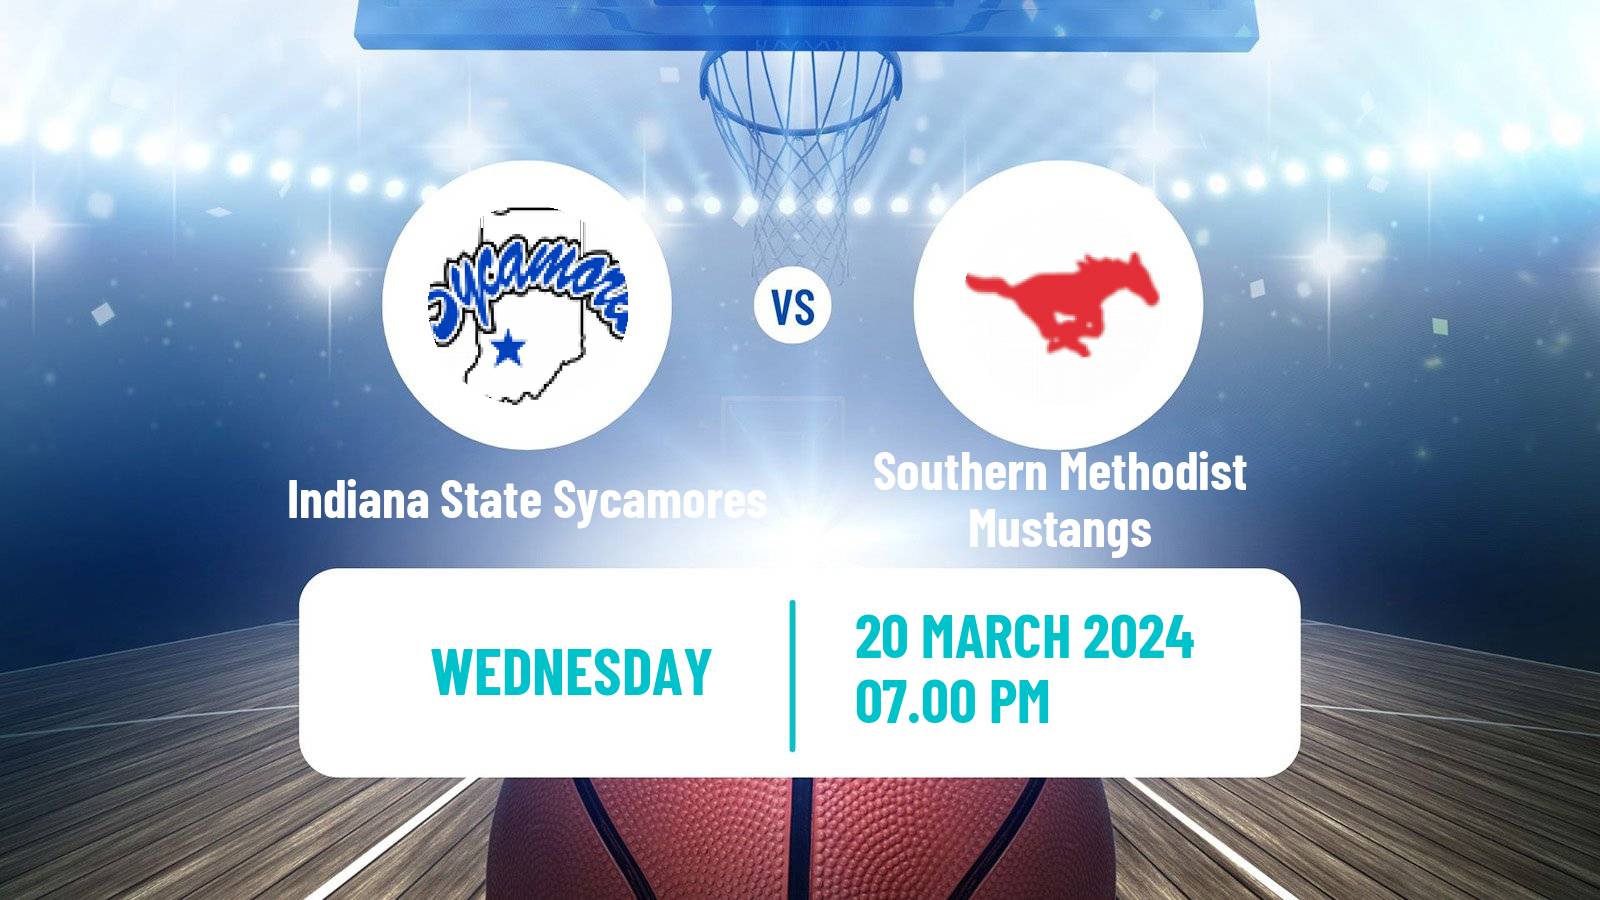 Basketball NIT Indiana State Sycamores - Southern Methodist Mustangs